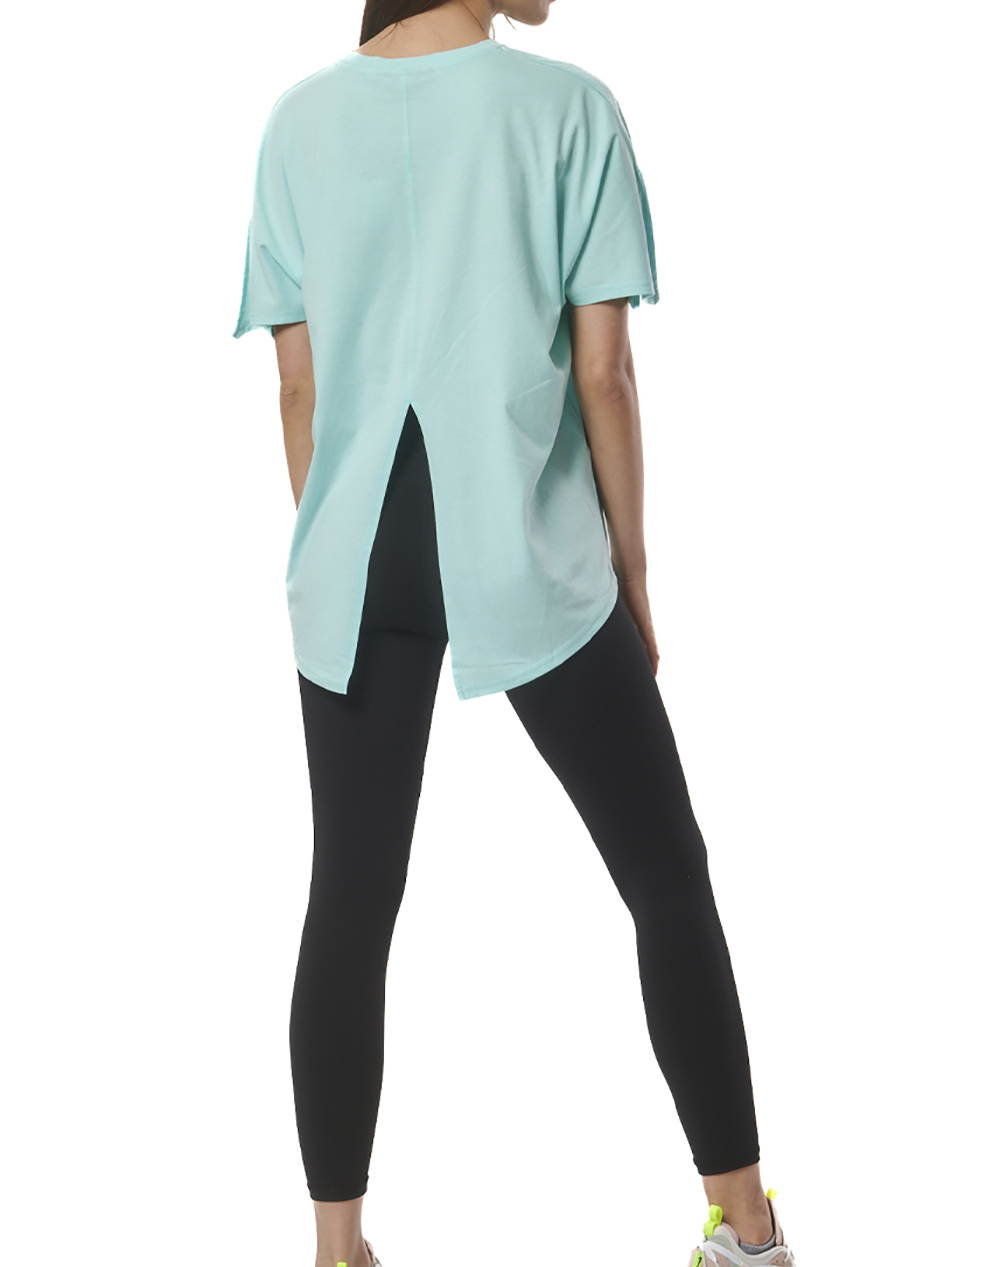 BODY ACTION WOMENS OVERSIZED TOP W/CUTS